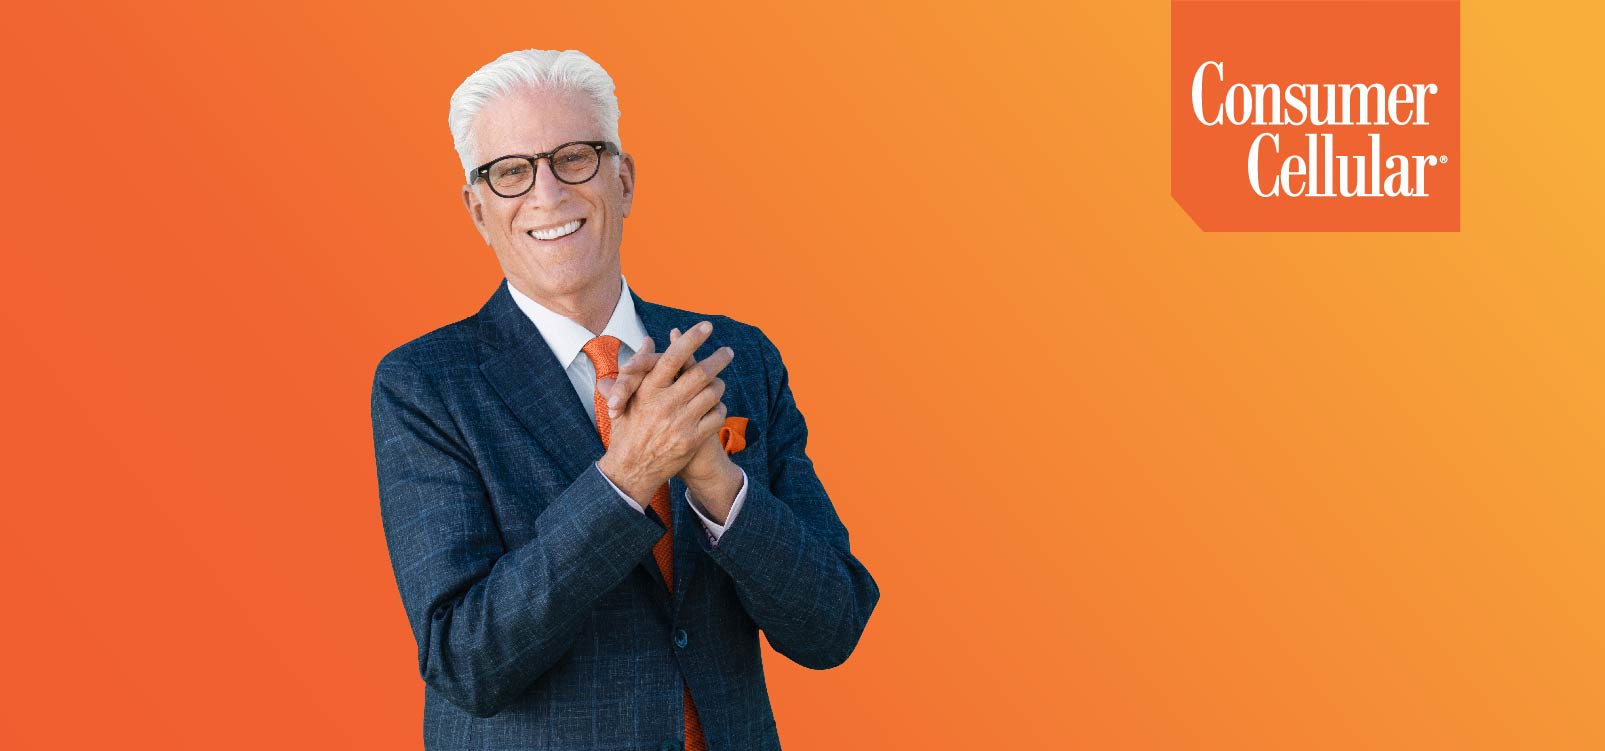 WE’RE THRILLED TO HAVE TED DANSON REPRESENT CONSUMER CELLULAR Our Blog